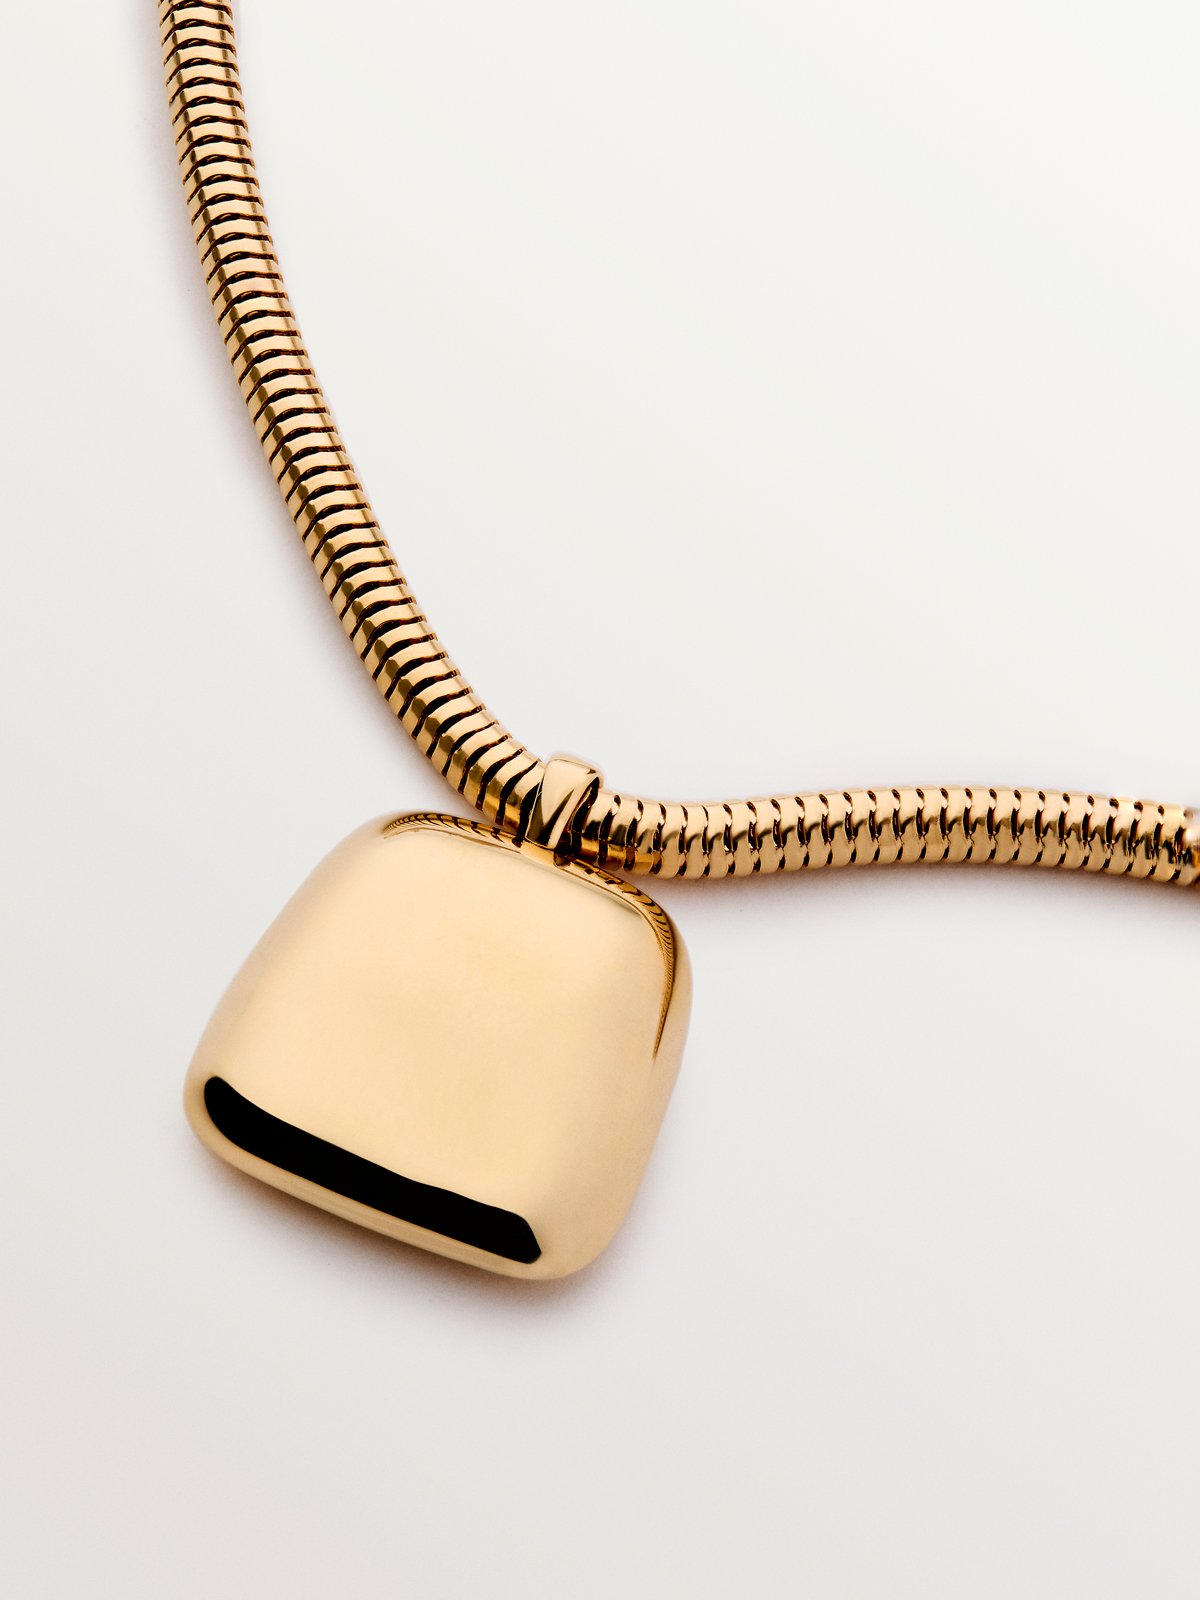 Square pendant in 18K yellow gold plated 925 silver with polished effect